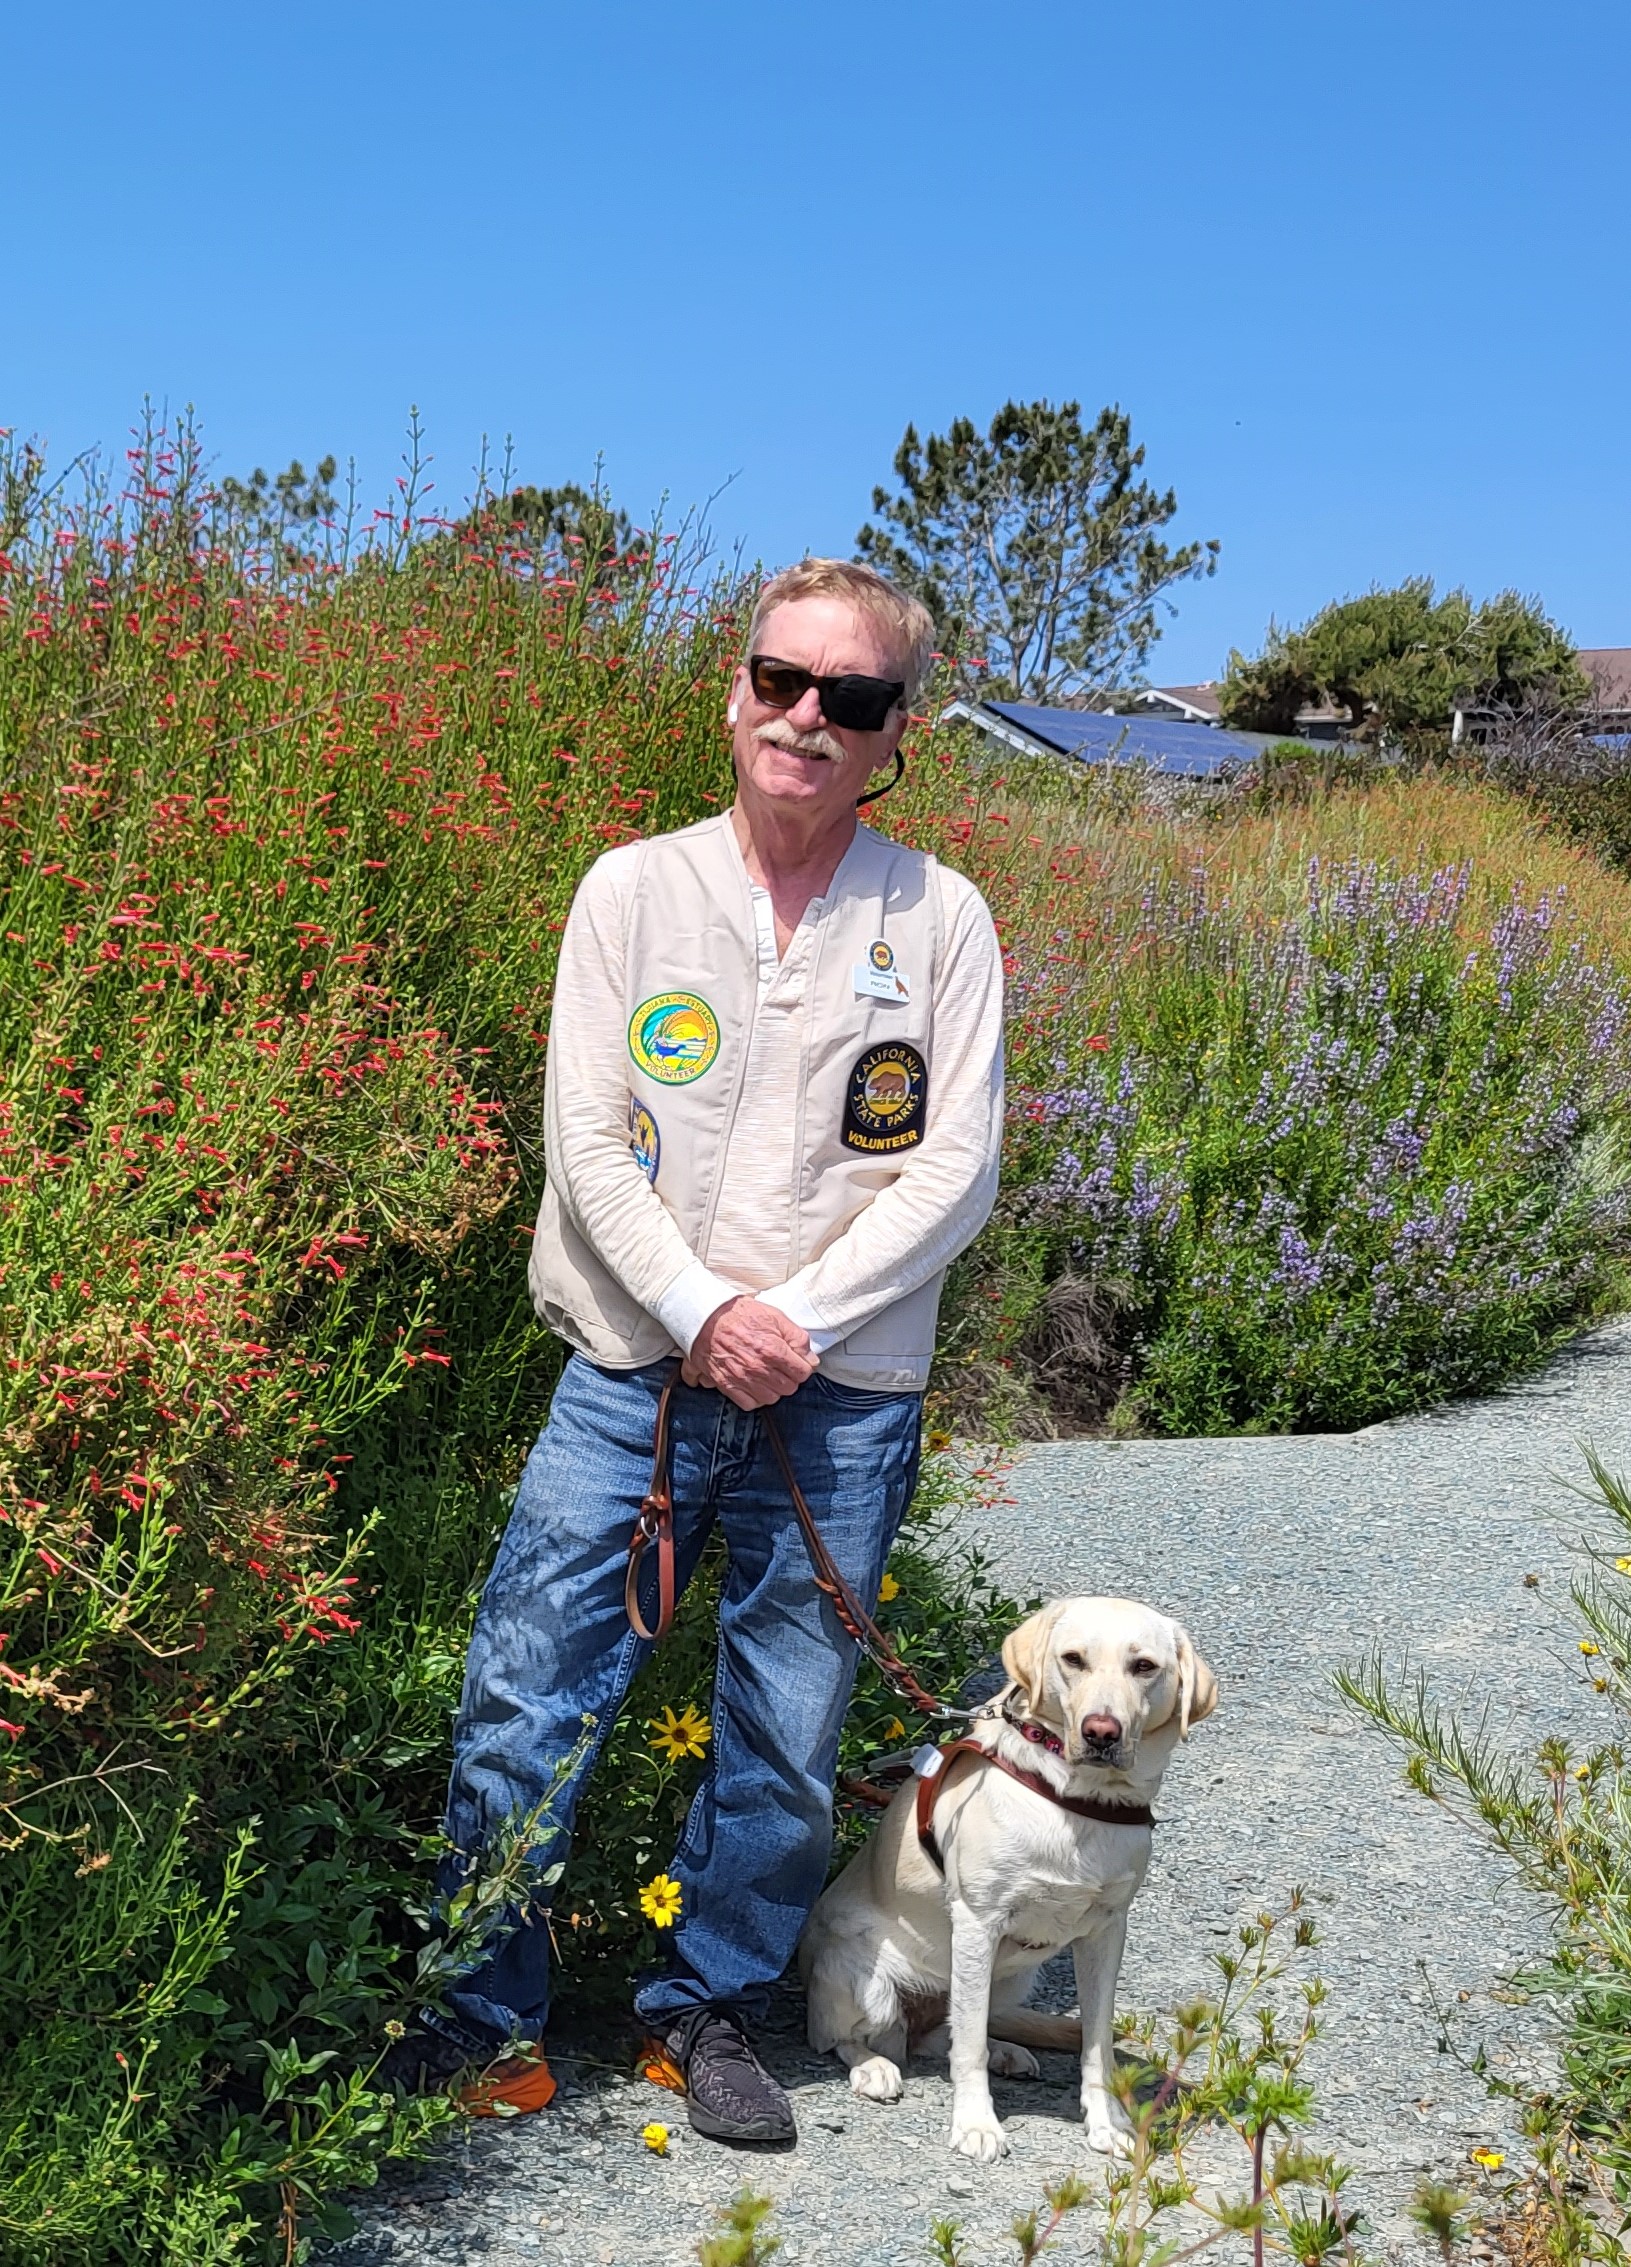 A man stands with his dog among flowers.